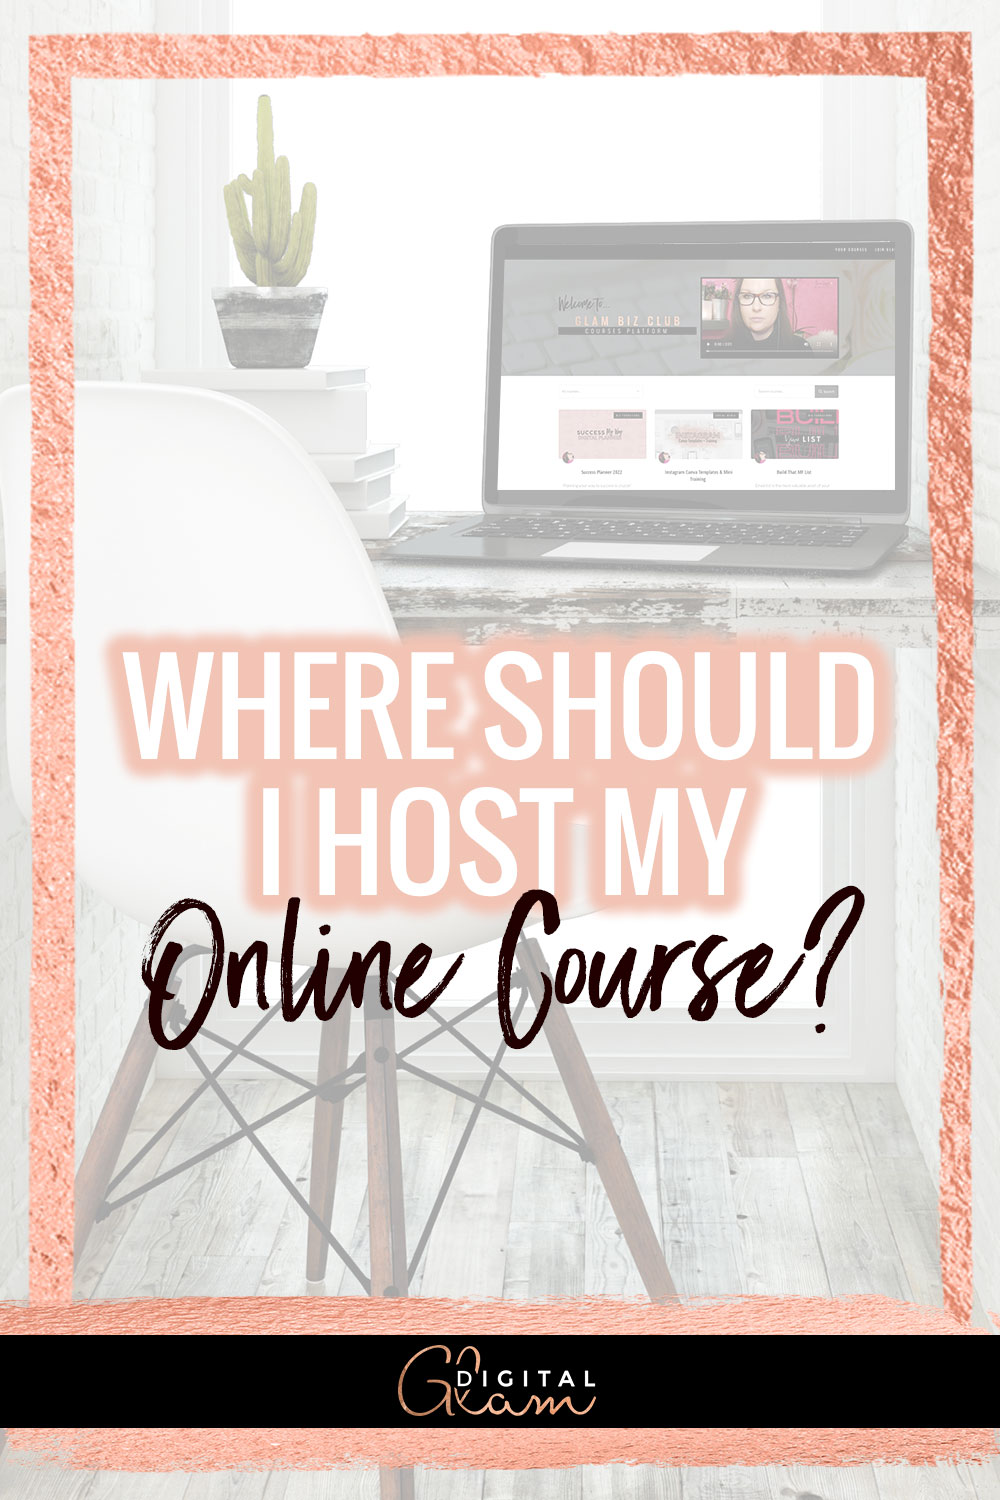 WHAT ARE THE BEST STRATEGIES & TOOLS FOR CREATING AN MEMBERSHIP SITE OR ONLINE COURSE?